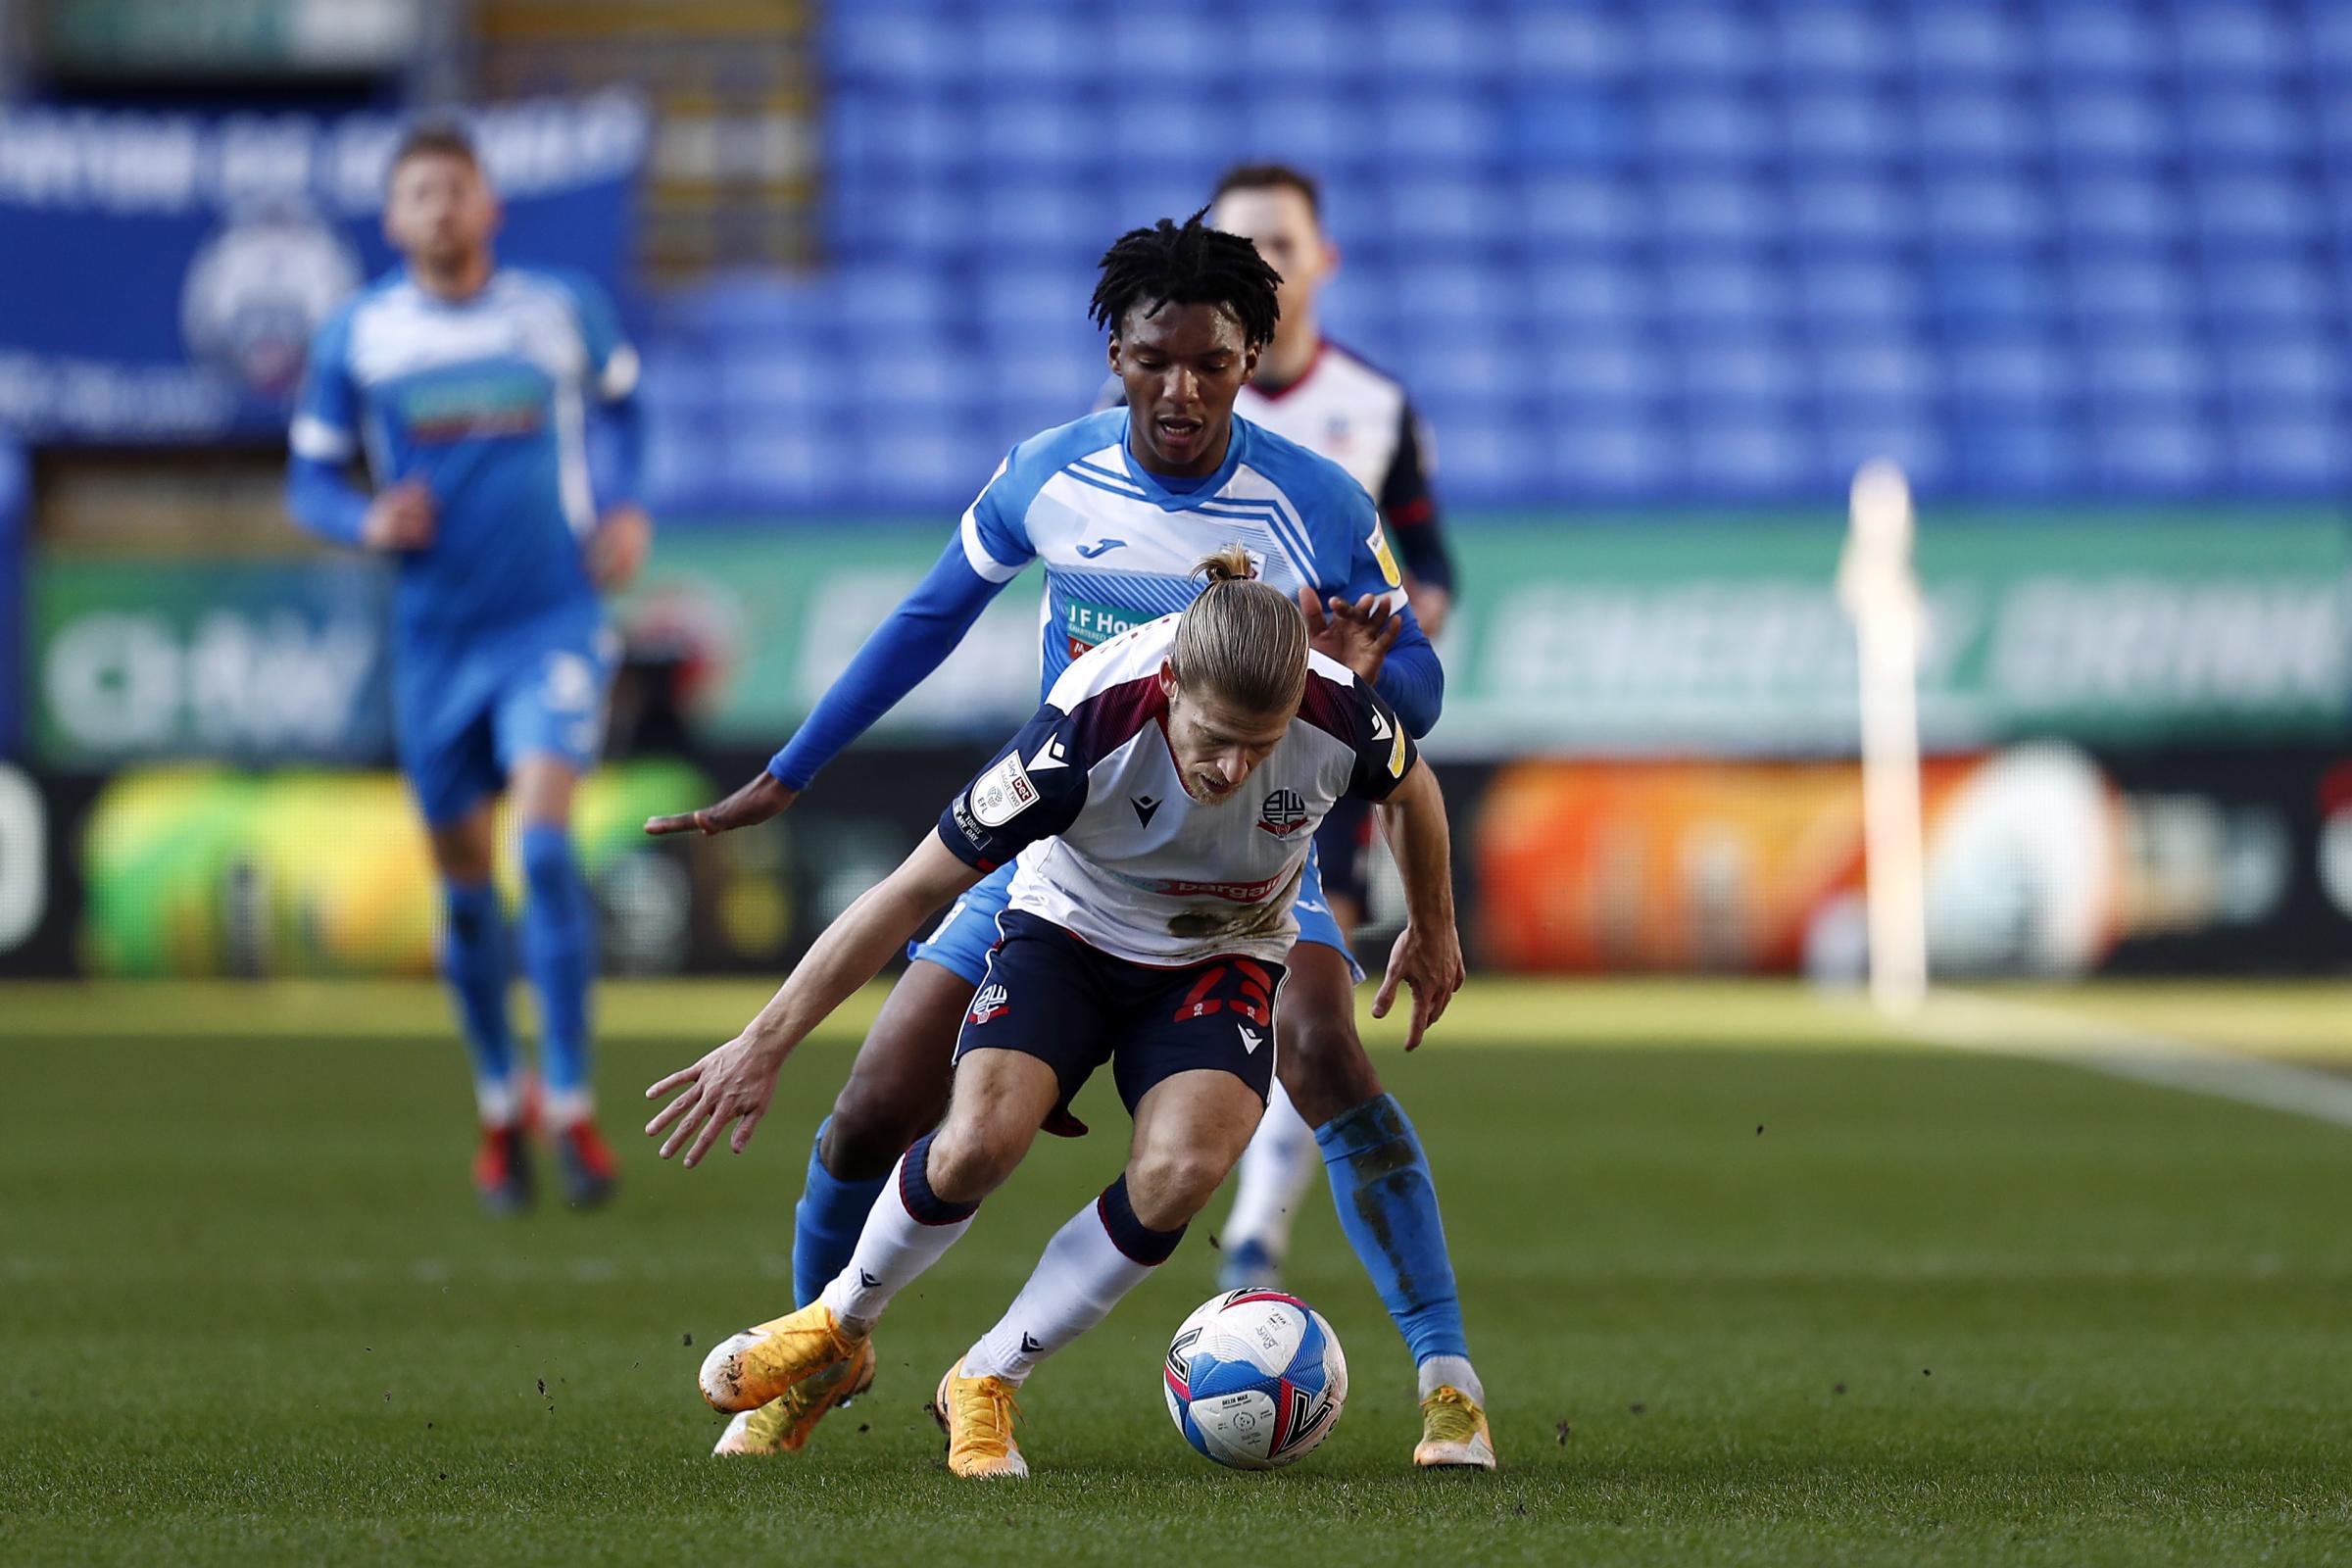 BOLTON, ENGLAND, FEB 27TH Barrows Kgosi Ntlhe challenges Boltons Lloyd Isgrove during the Sky Bet League 2 match between Bolton Wanderers and Barrow at the Reebok Stadium, Bolton on Saturday 27th February 2021. (Credit: Chris Donnelly | MI News)